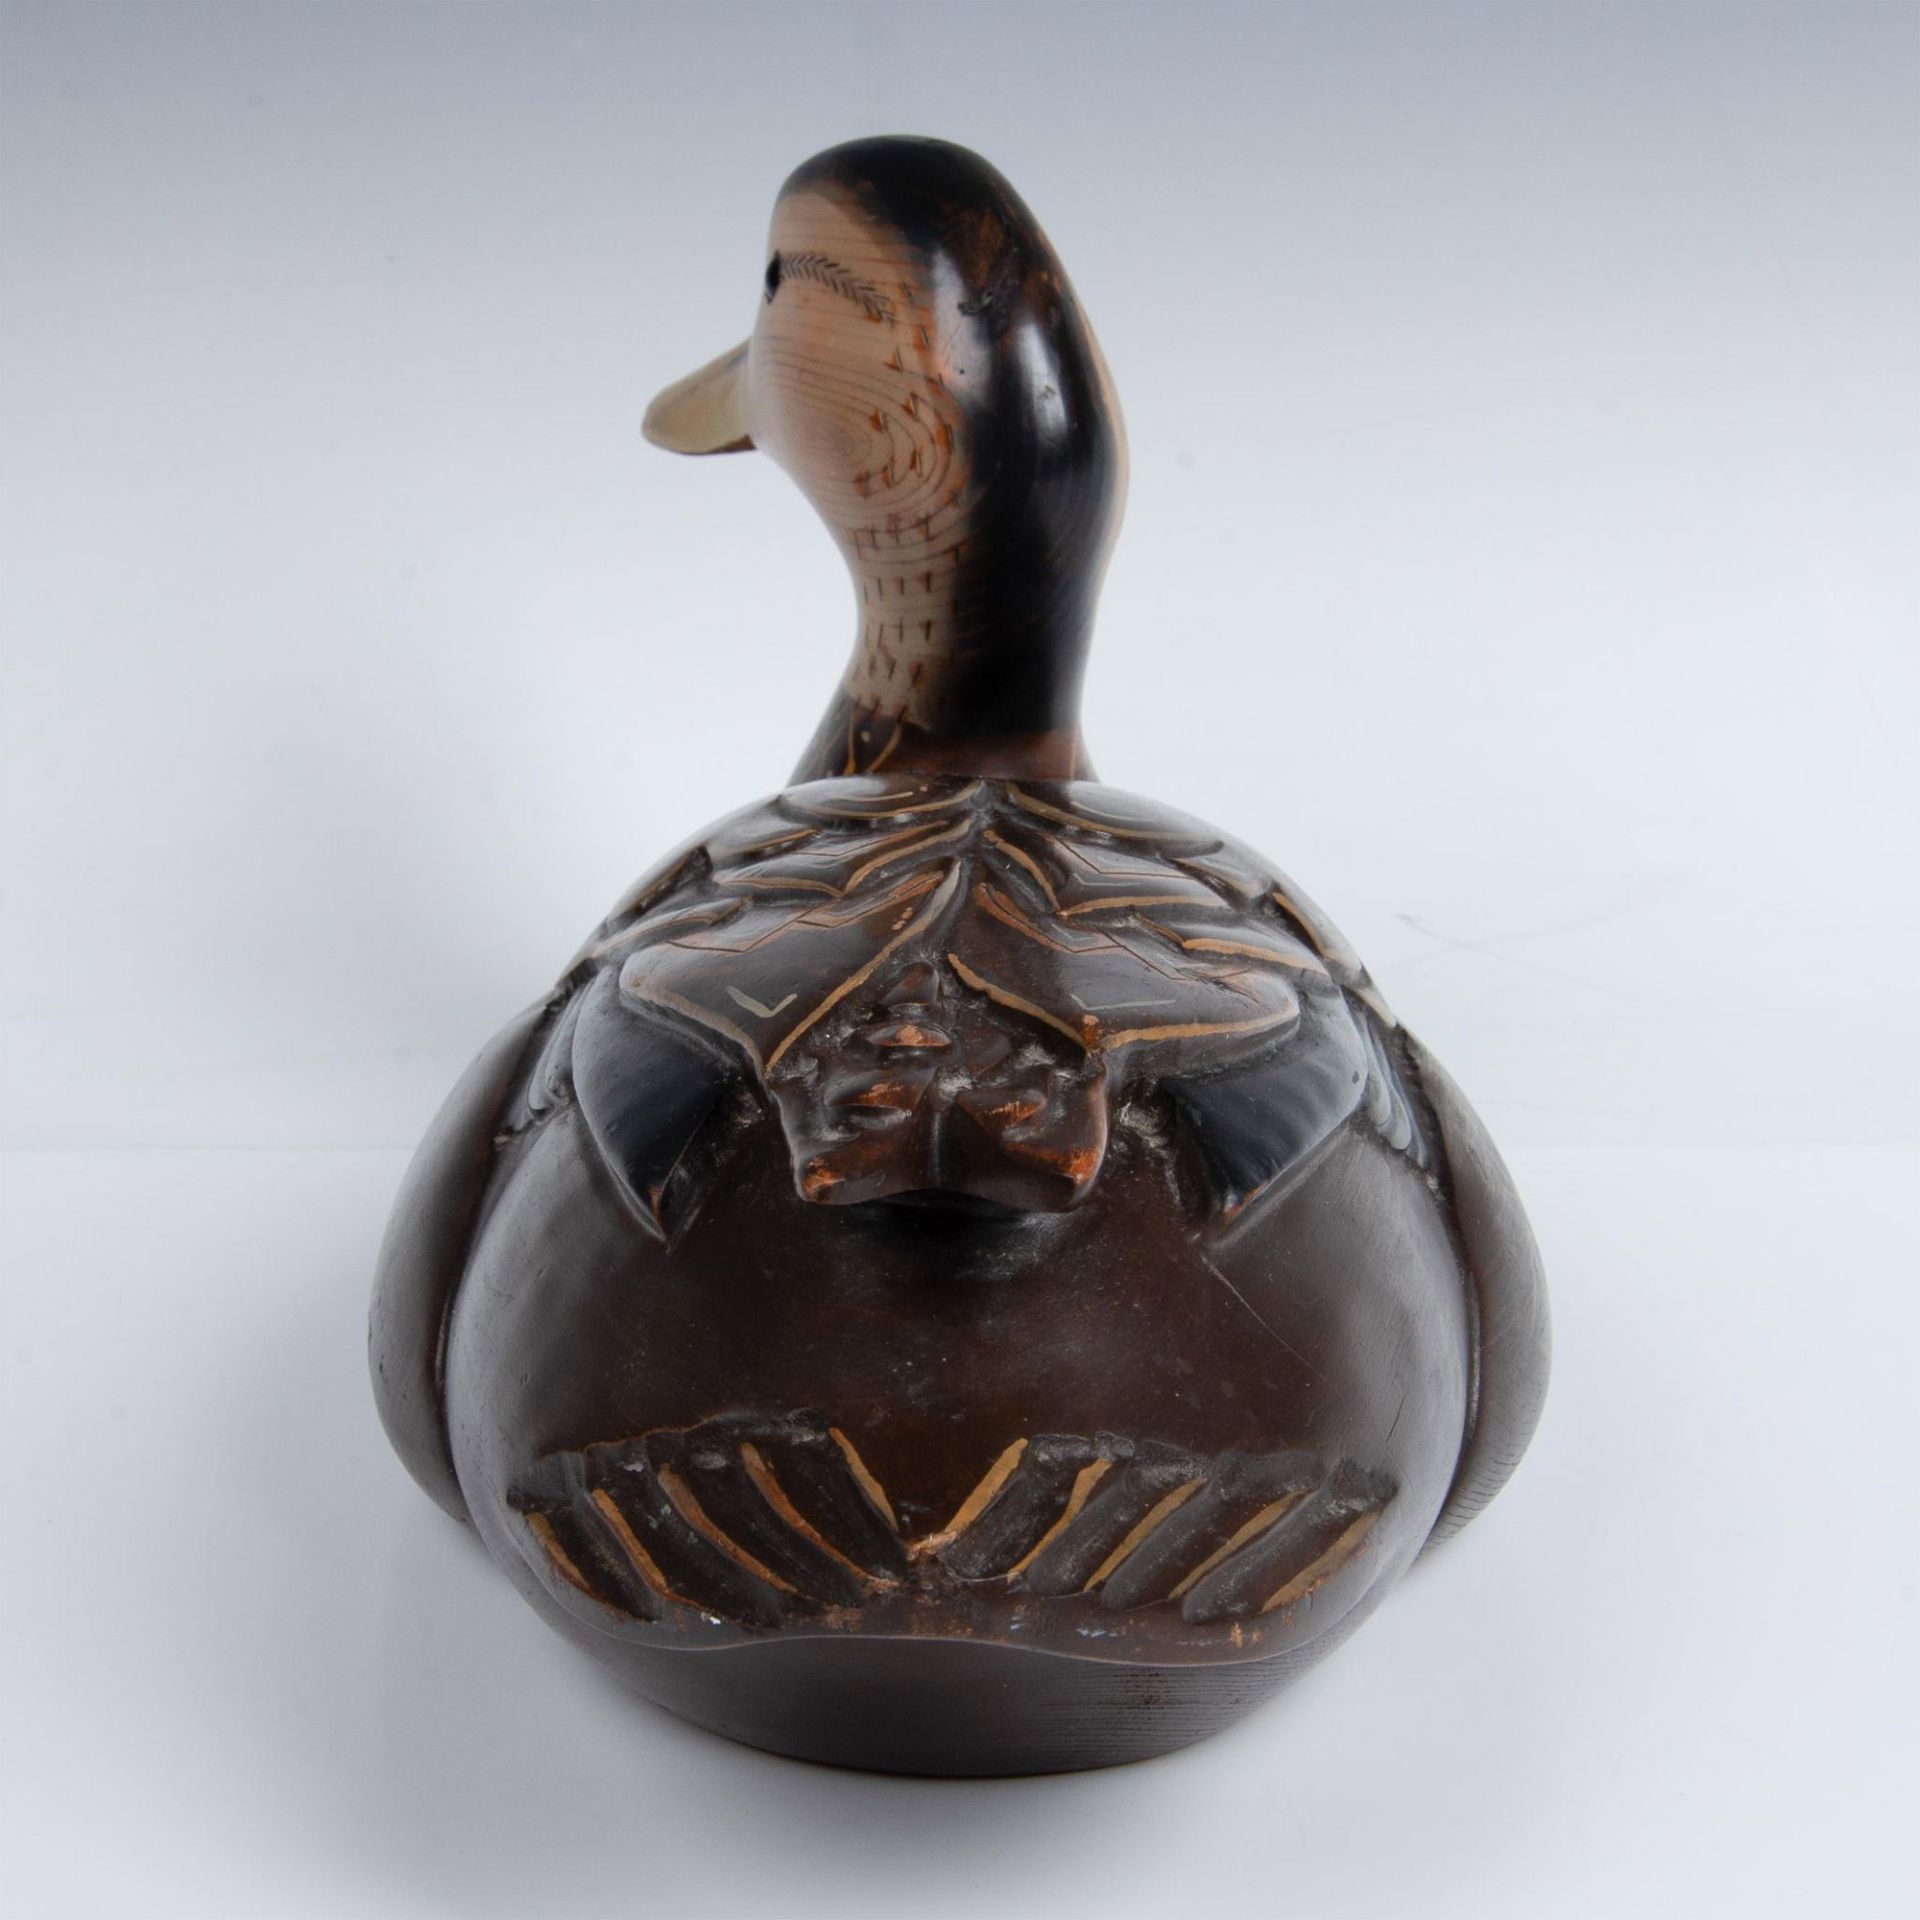 Vintage Ducks Unlimited by Tom Taber Duck Decoy - Image 4 of 5